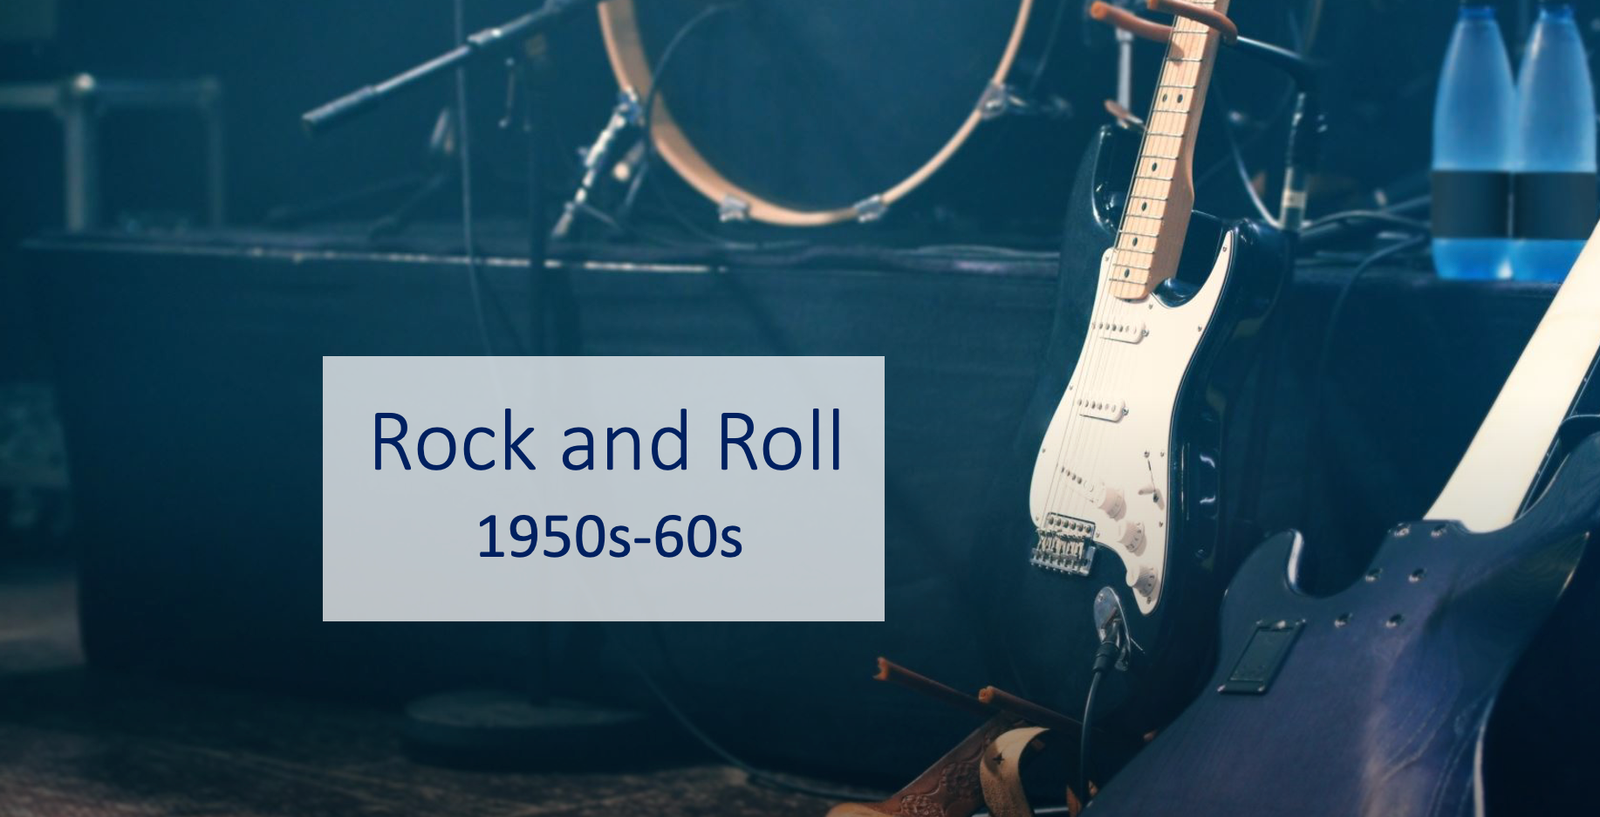 Vintage guitar and drums, Rock and Roll era stage.